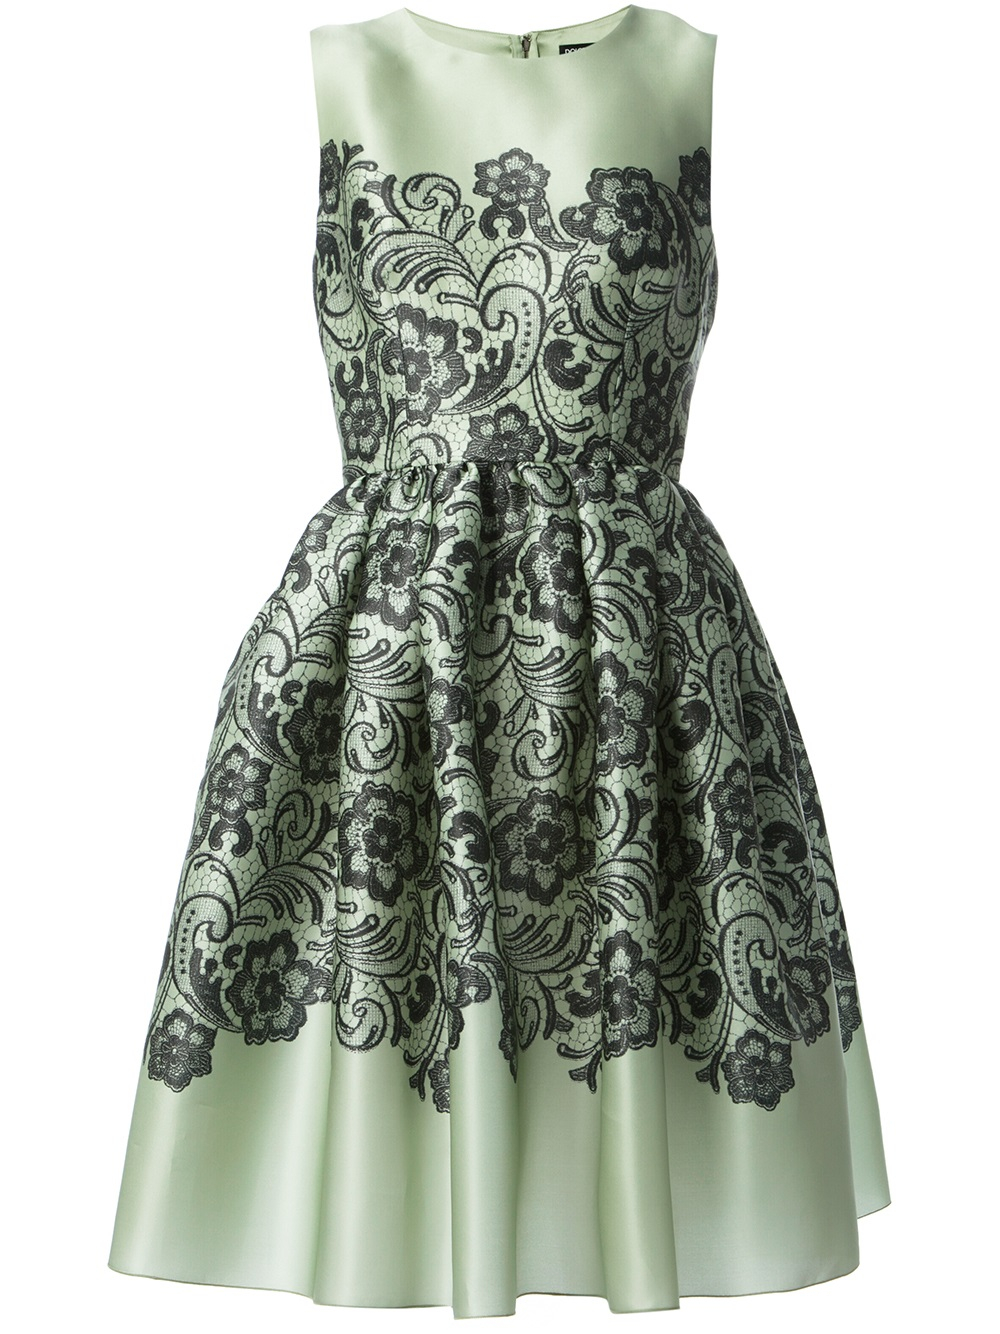 Lyst - Dolce & gabbana Floral Paisley Print Dress in Green